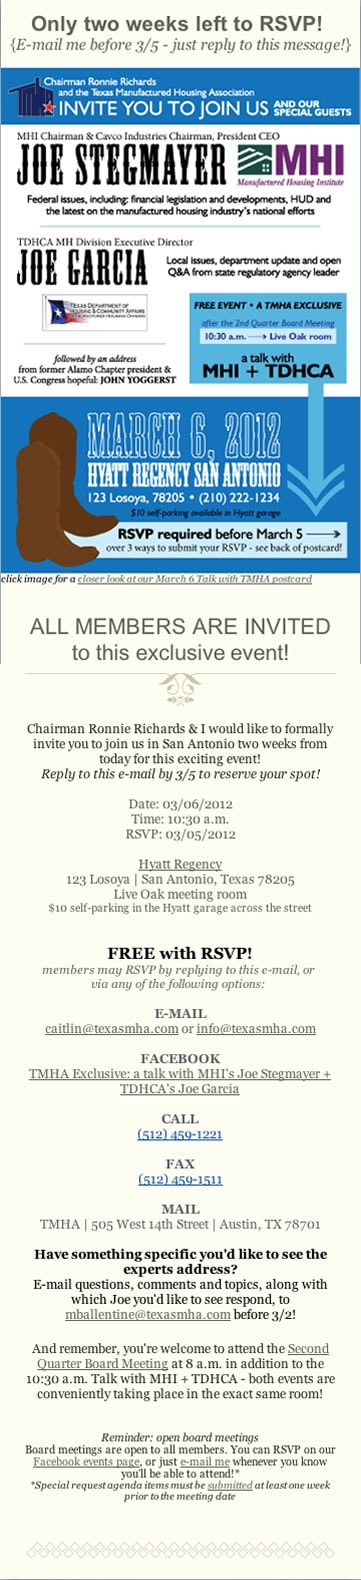 Mhi's joe stegmayer + special guests in san antonio march 6 attend free with rsvp!